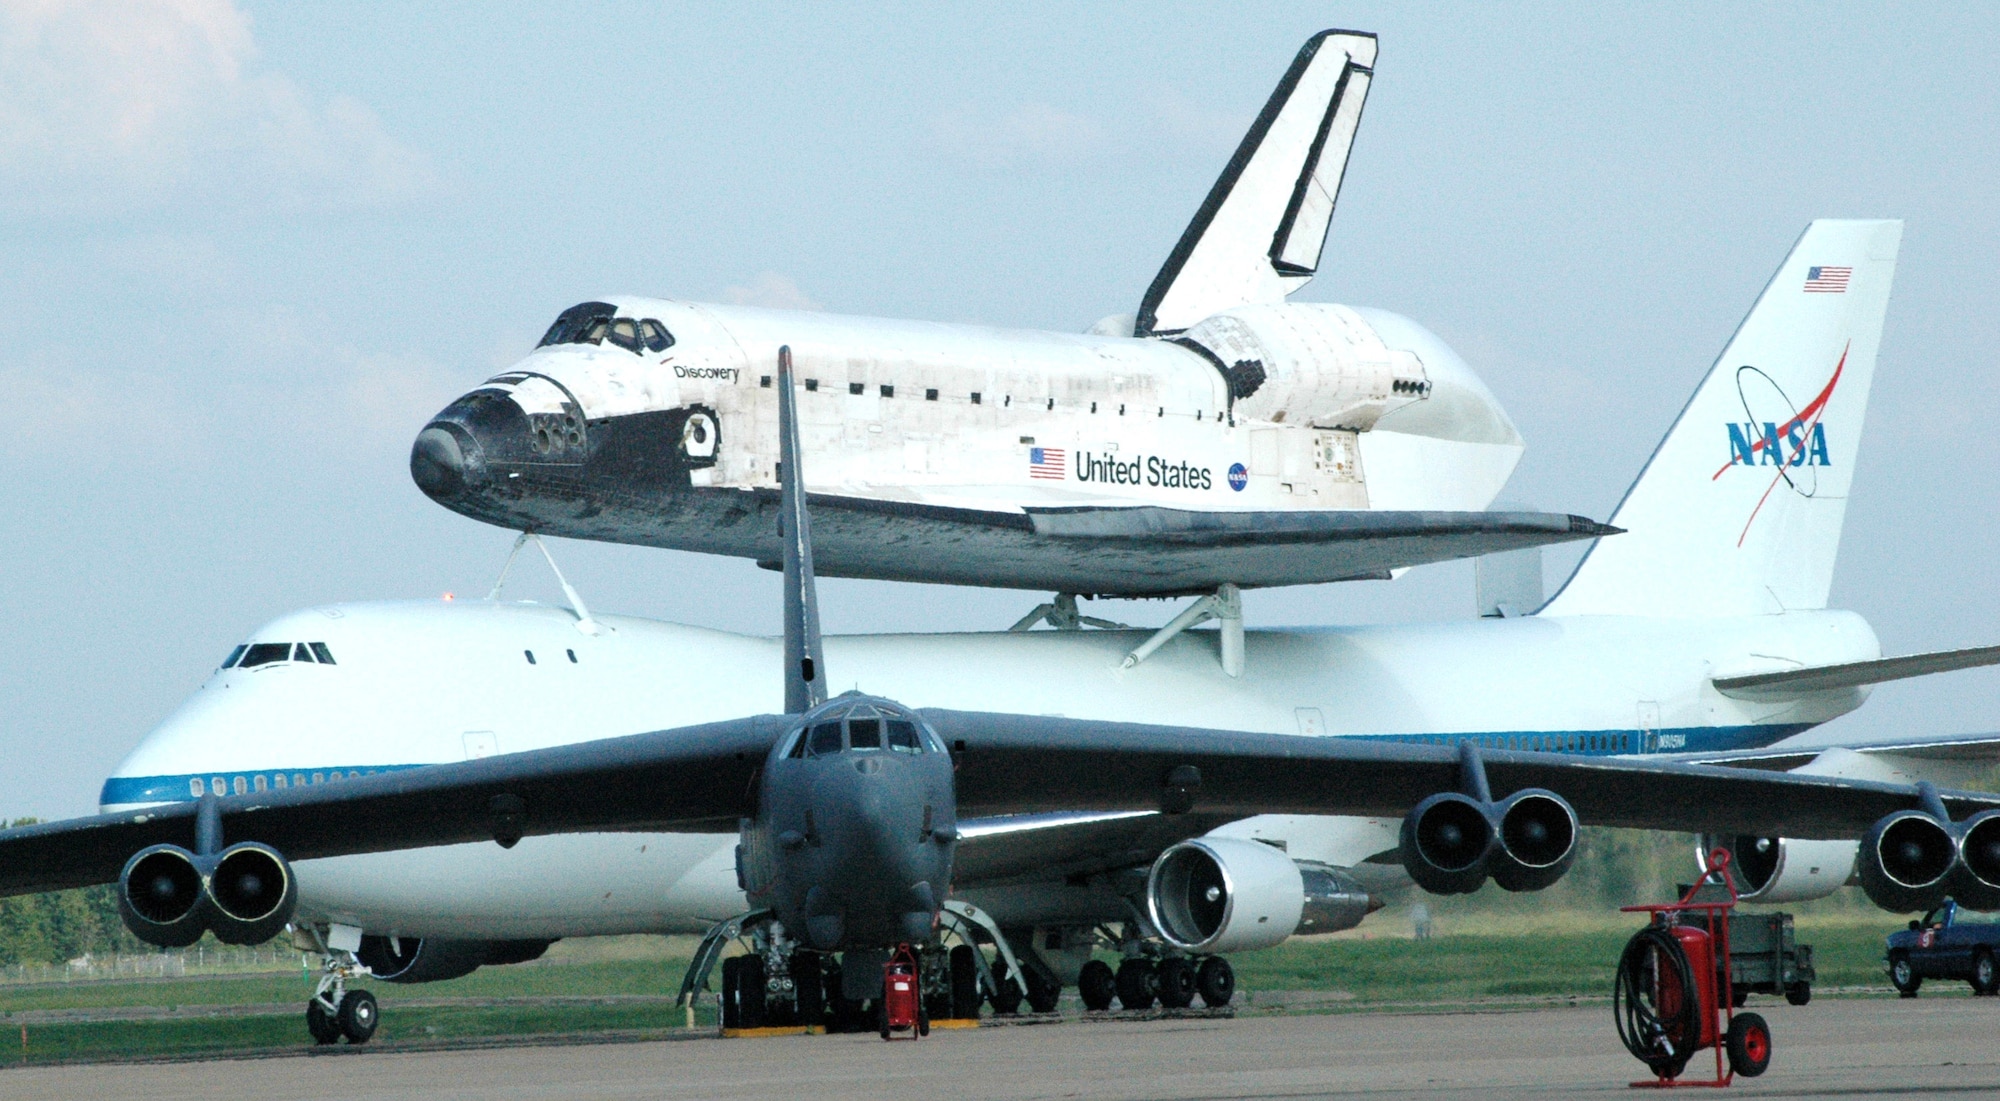 BARKSDALE AIR FORCE BASE, La. -- A NASA Boeing 747 carrying Space Shuttle Discovery, still scorched from its re-entry into Earth's atmosphere, taxis here Aug. 19.  Discovery's stop was the second of two as the shuttle was on its way back to Kennedy Space Center, Fla. (U.S. Air Force photo by Airman 1st Class Brandon Kusek)